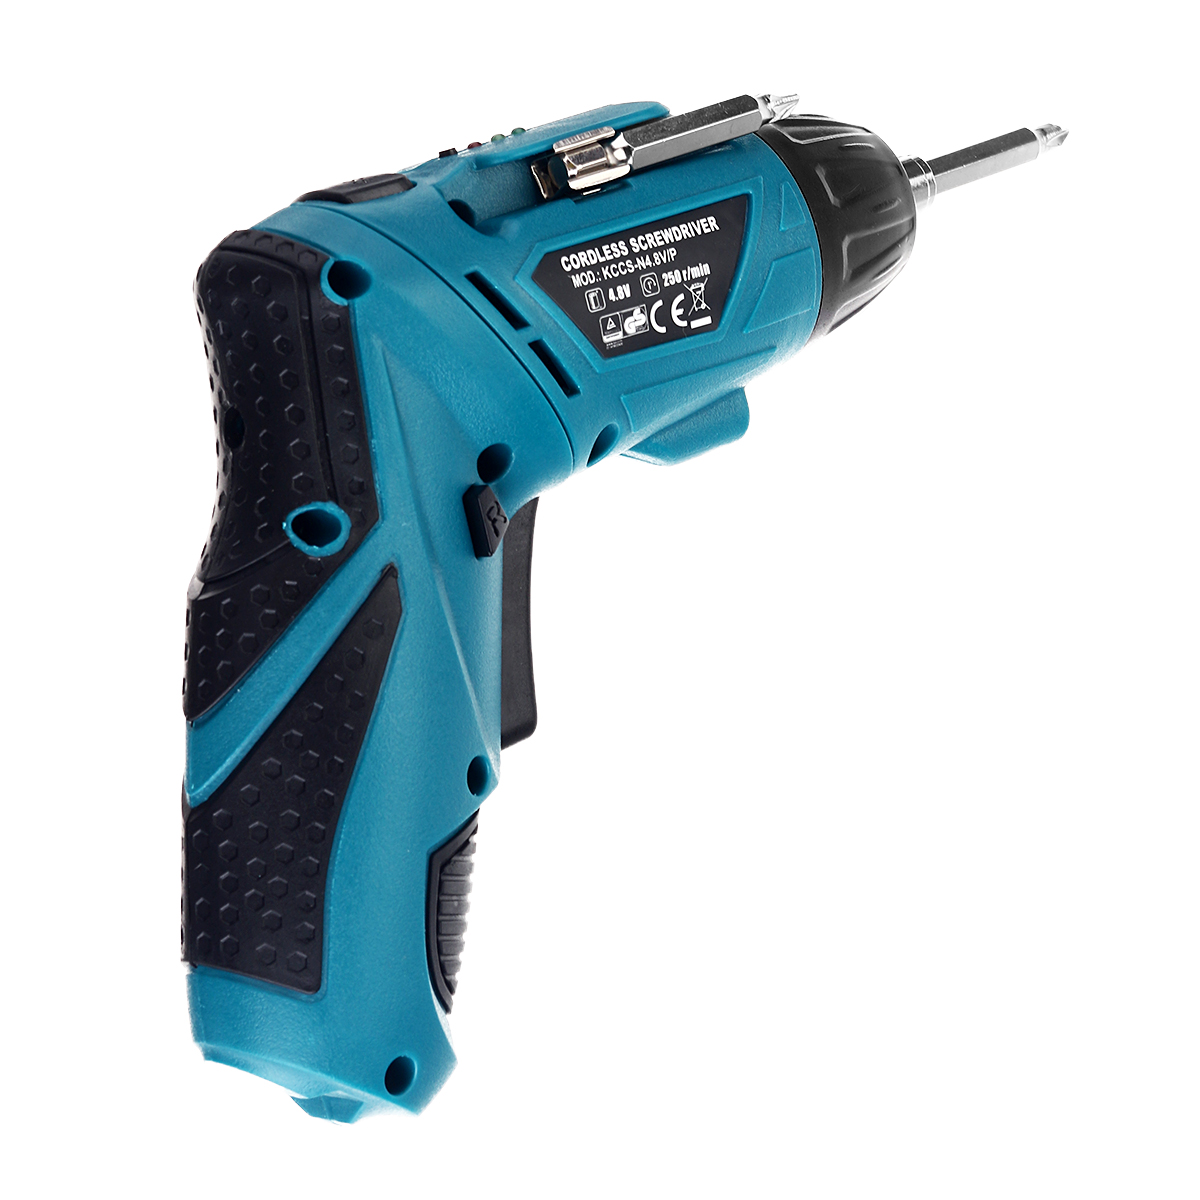 48V-Electric-Drill-Screw-Driver-Rechargeable-Cordless-Screwdriver-Tool-Drill-Bit-Set-1678689-6